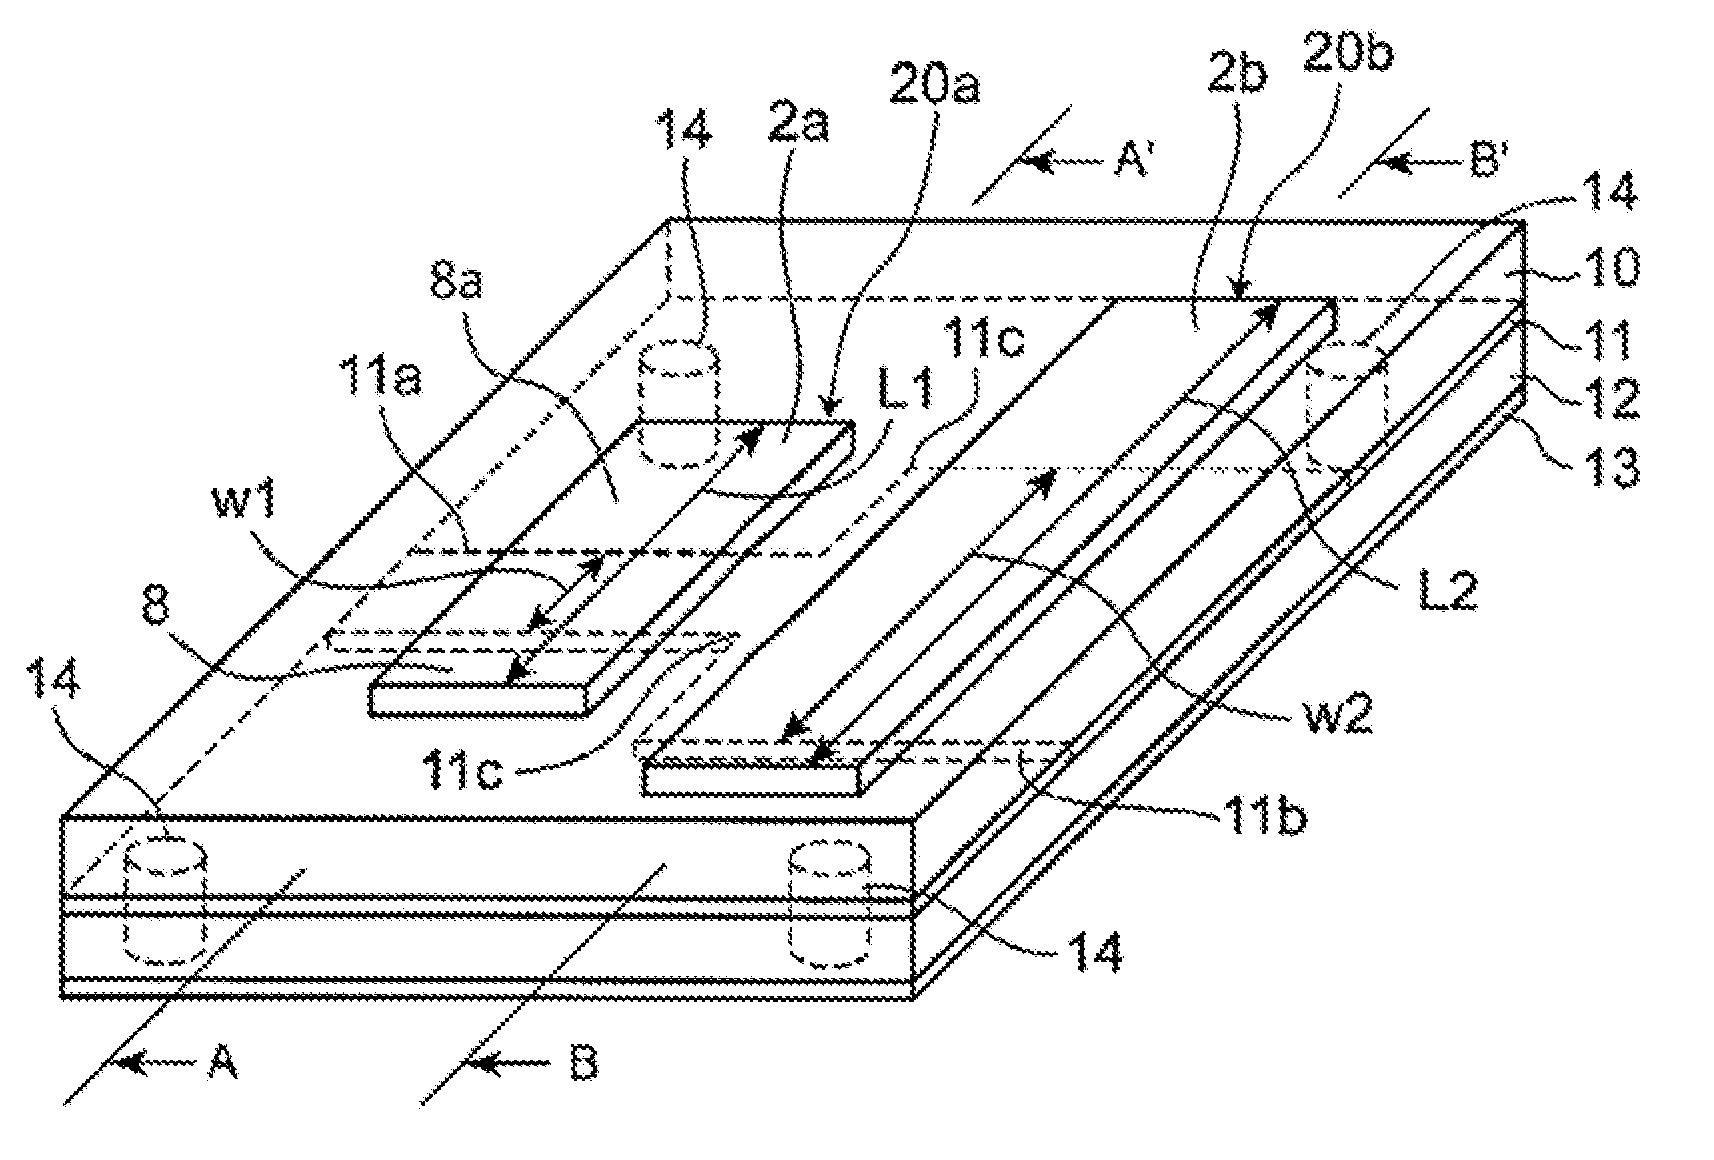 Parallel differential transmission lines having an opposing grounding conductor separated into two parts by a slot therein